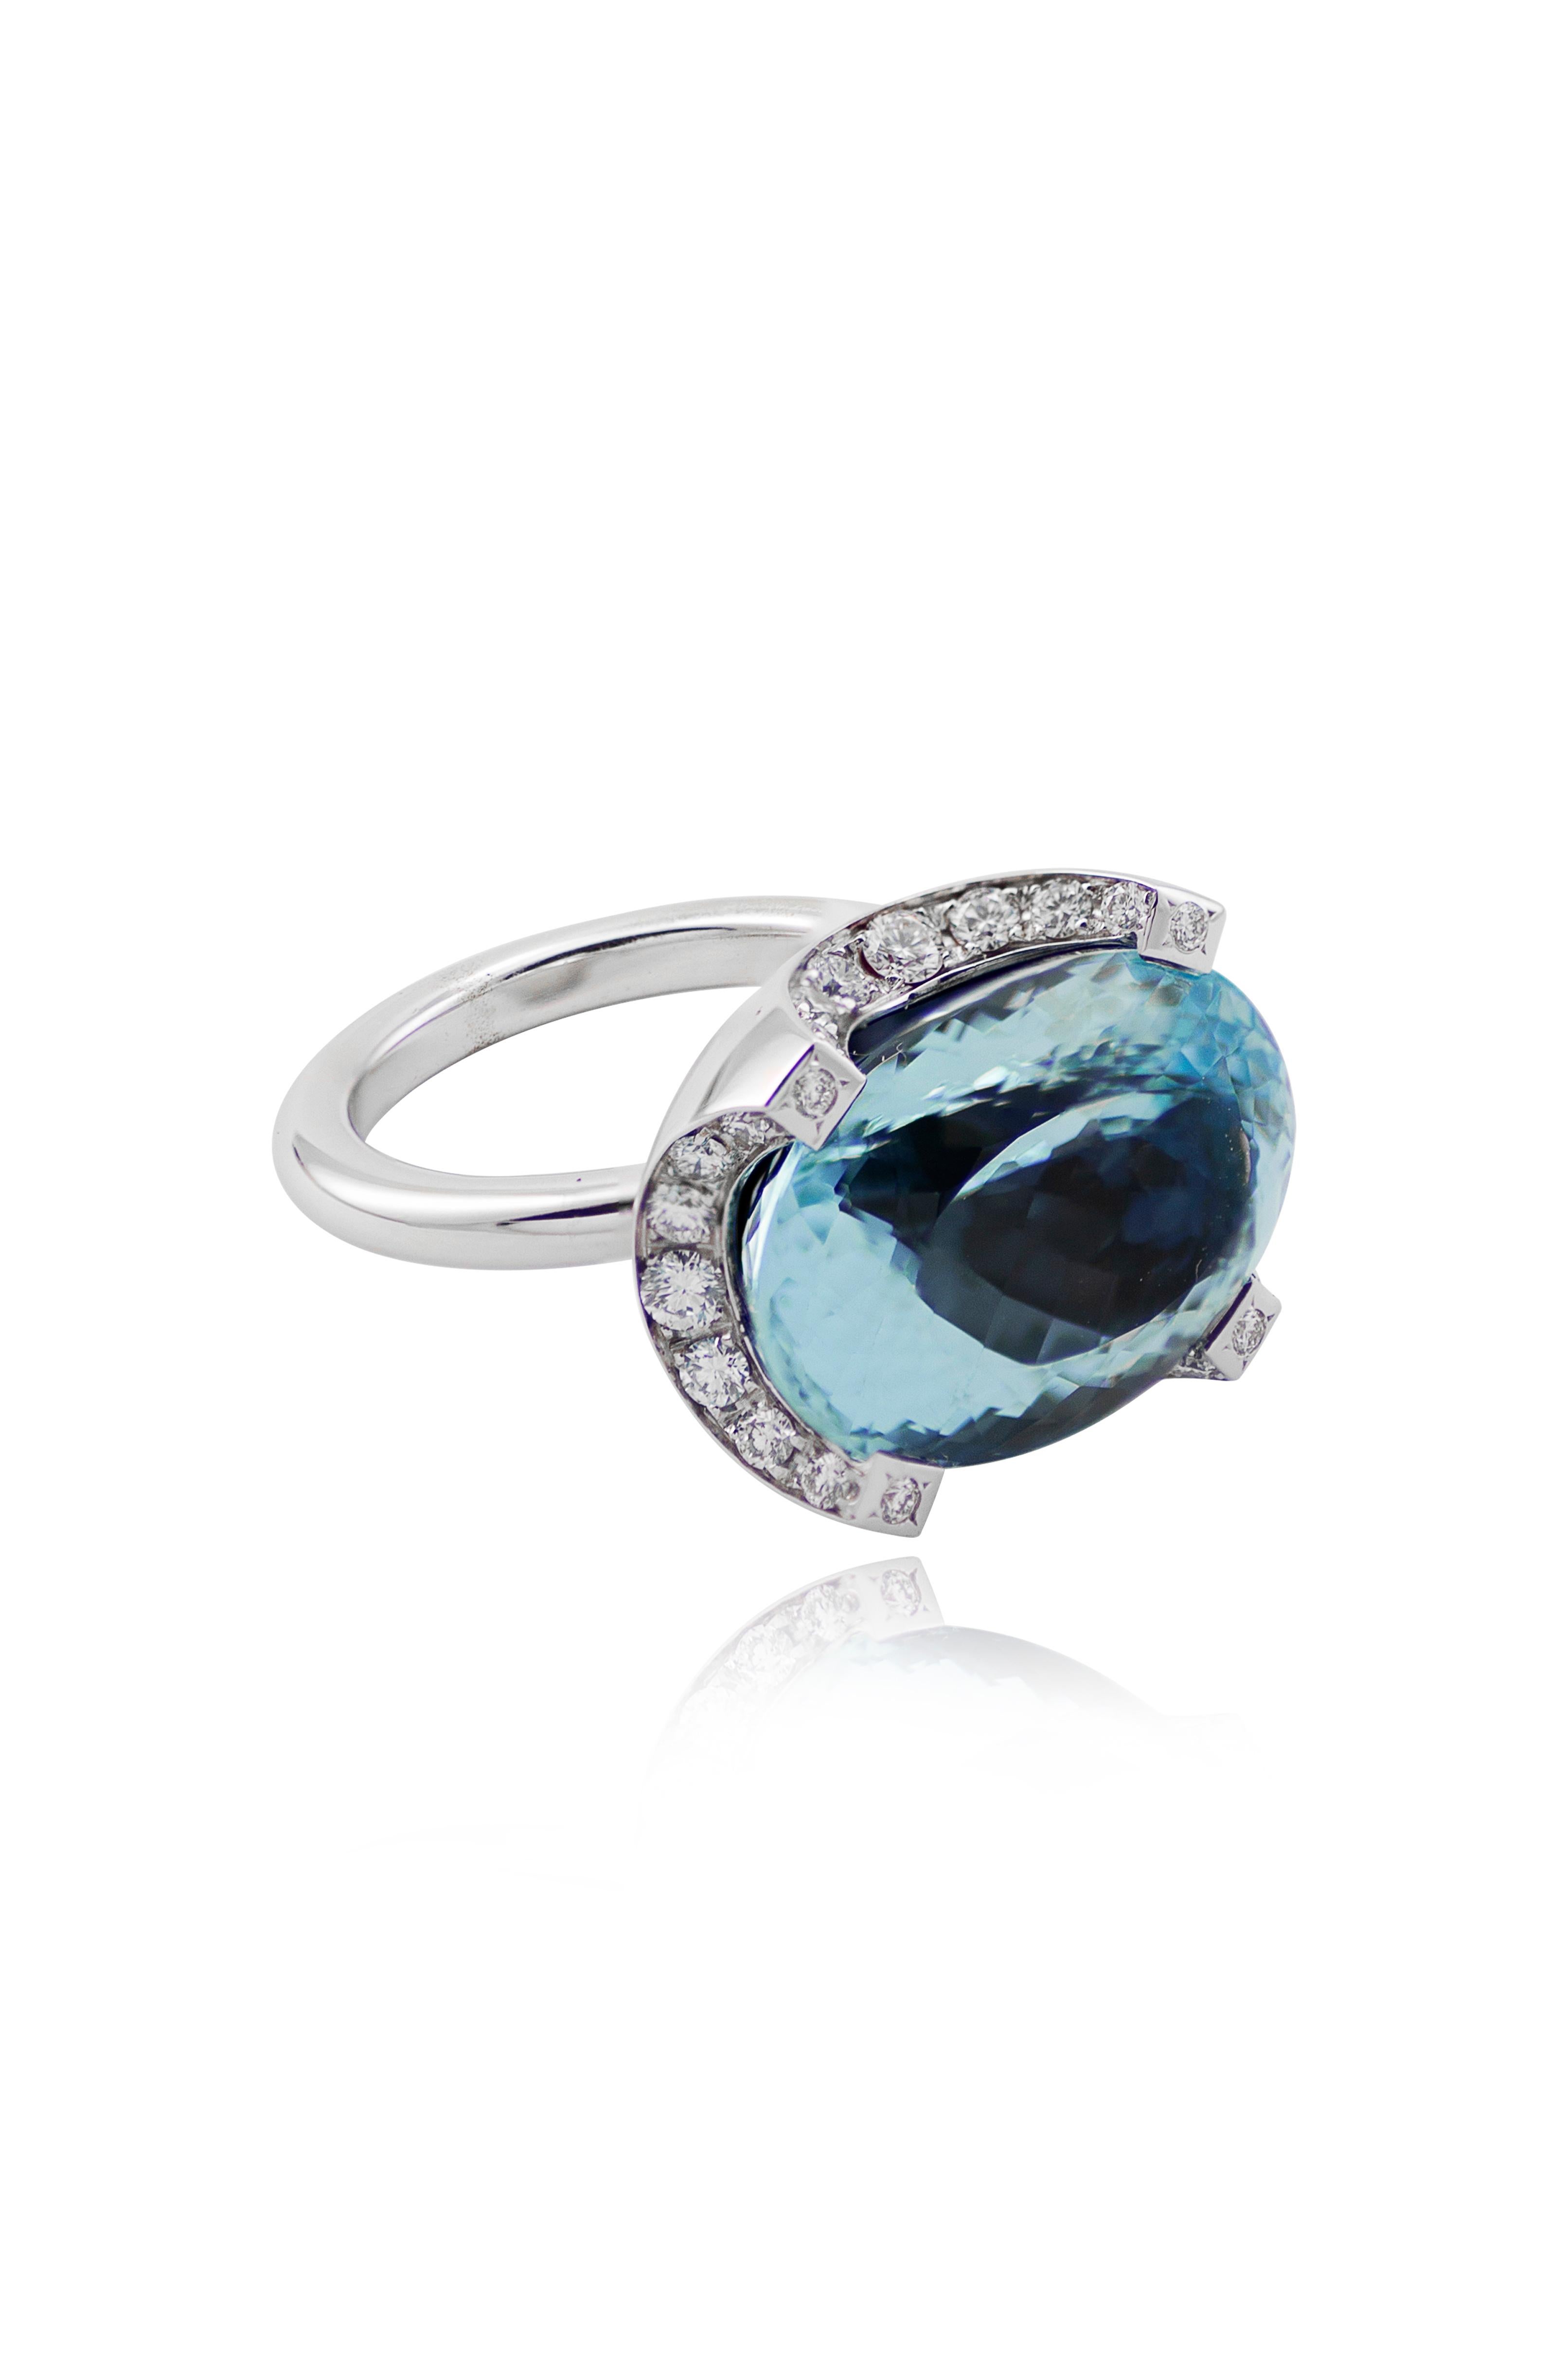 Handcrafted in Margherita Burgener family workshop, Italy,  the ring is centering an oval Brazilian aquamarine.
An evergreen contemporary design ring. 
4 diamonds are set on the upper parte of the design.
18 KT white gold grams 9.91
n. 32 diamonds